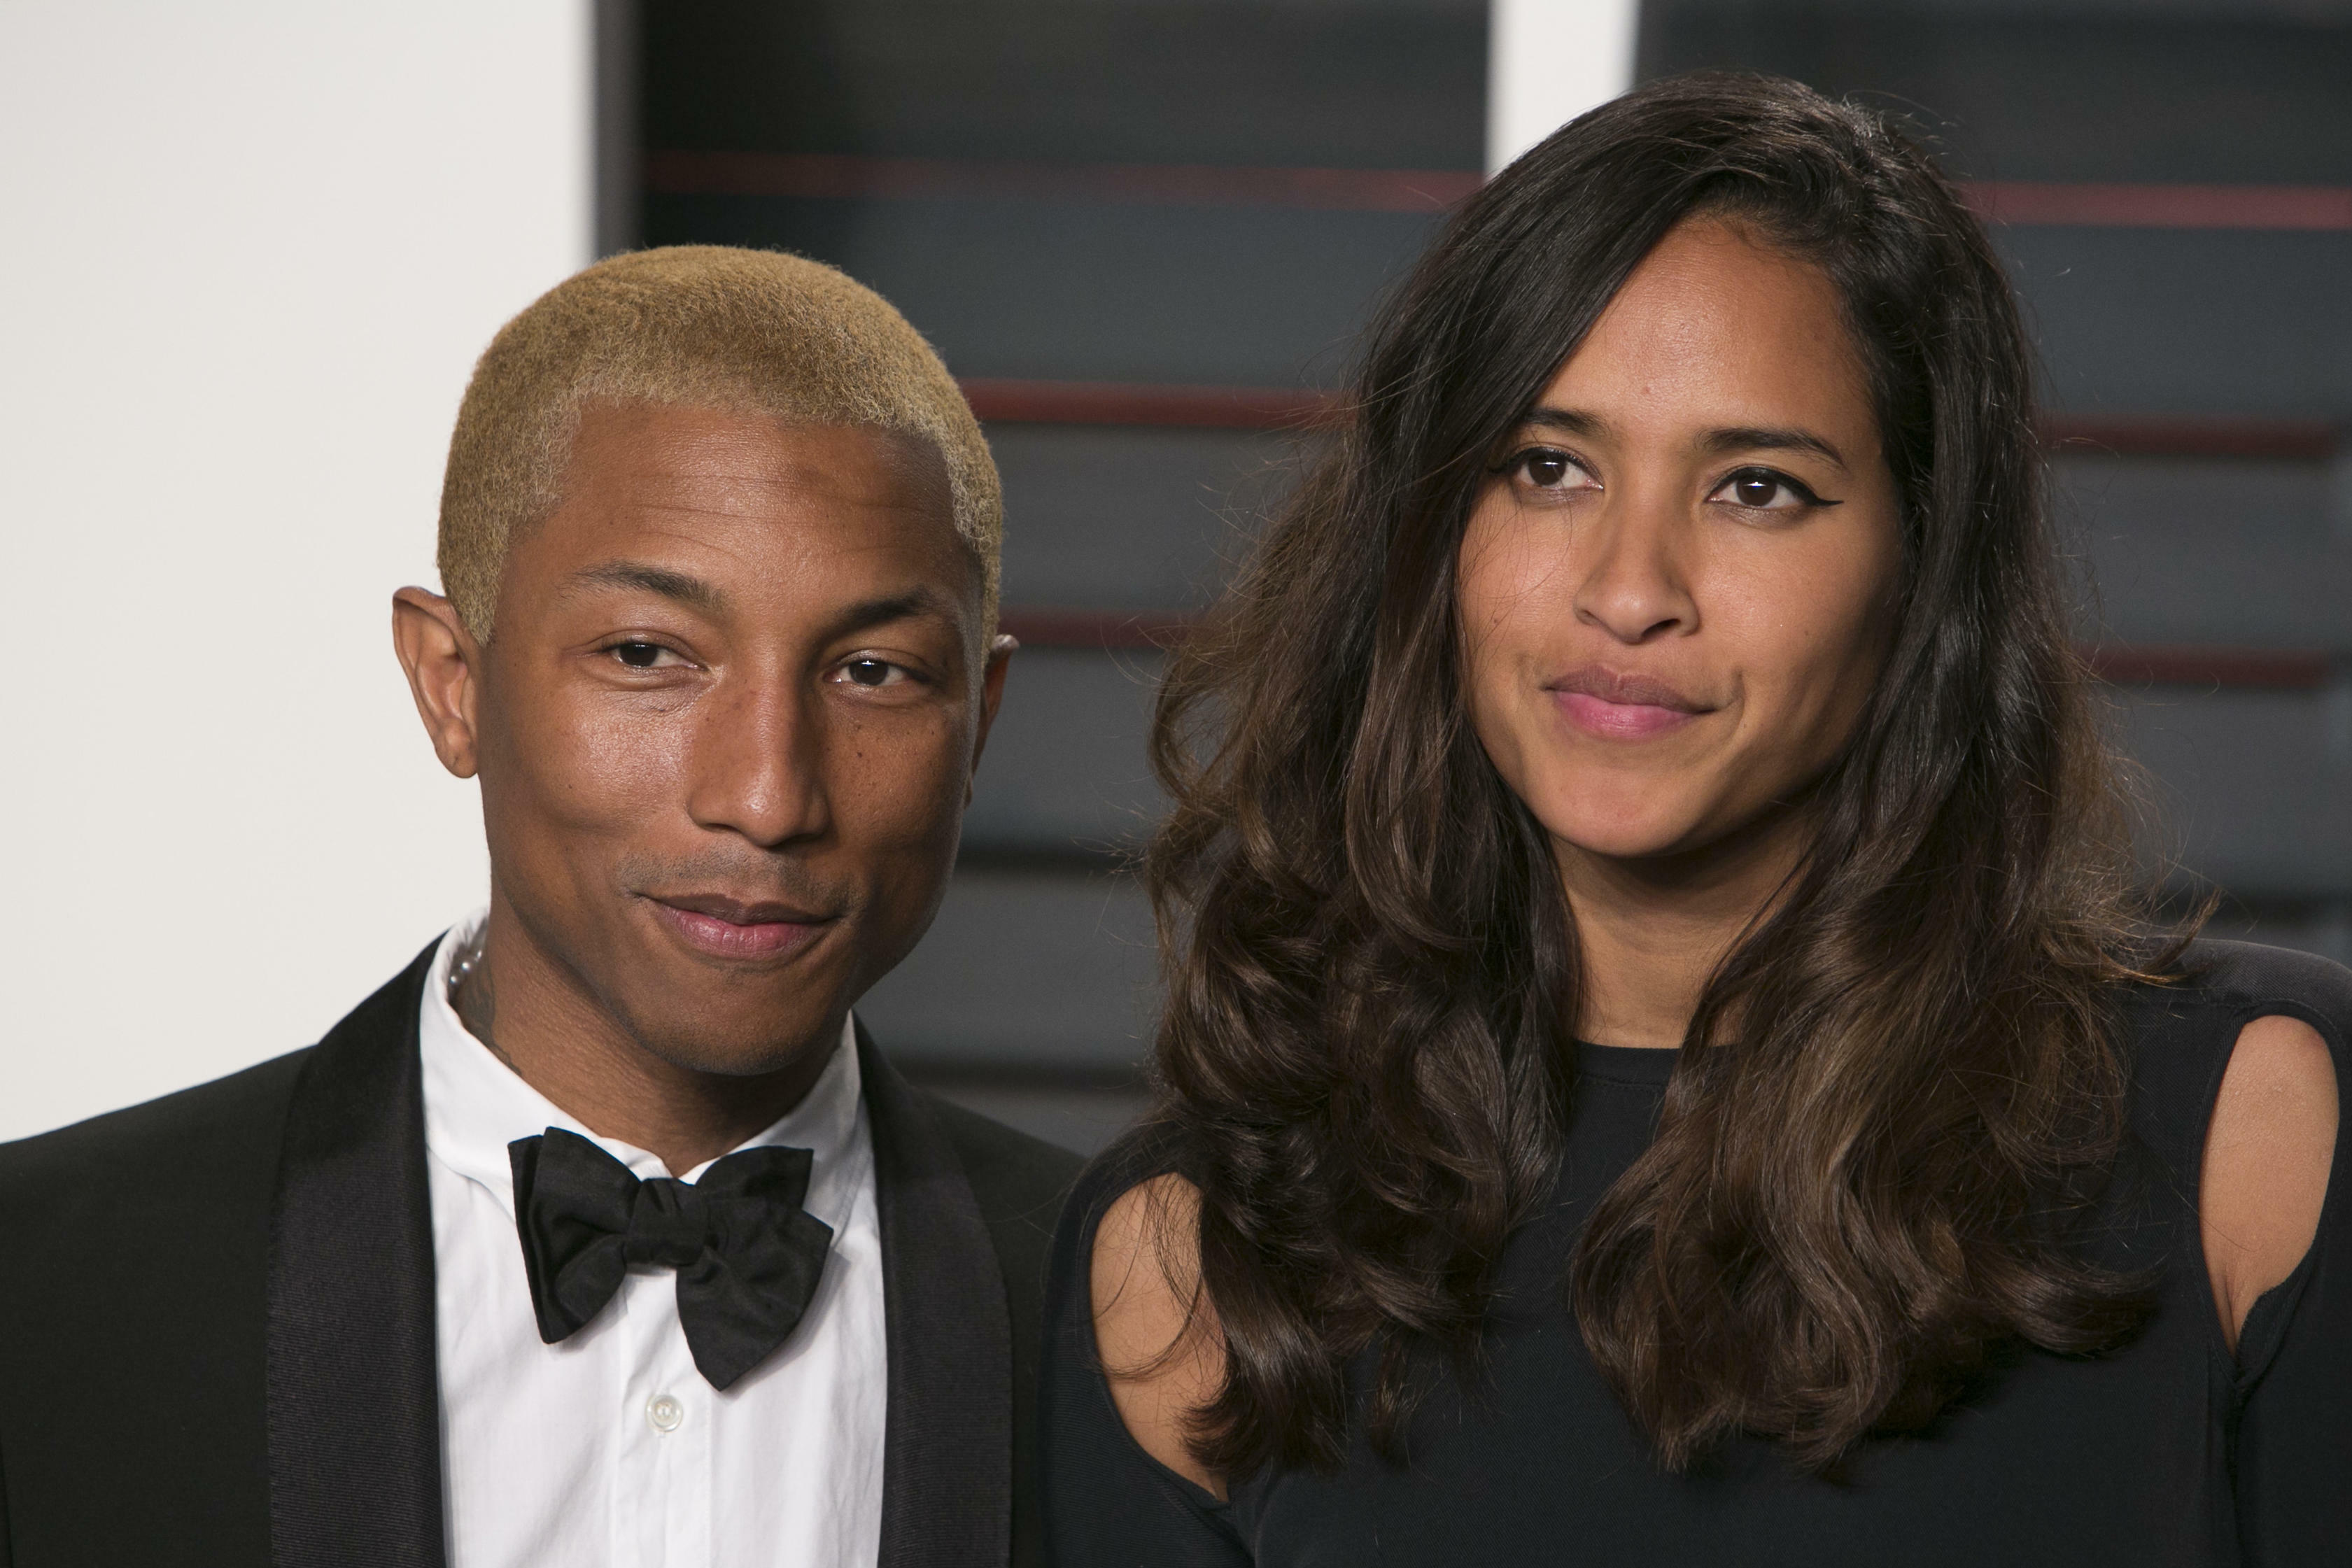 US musician Pharrell Williams and his wife Helen Lasichanh arrive to the 2016 Vanity Fair Oscar Party in Beverly Hills, California on February 28, 2016. / AFP / ADRIAN SANCHEZ-GONZALEZ        (Photo credit should read ADRIAN SANCHEZ-GONZALEZ/AFP/Getty Ima